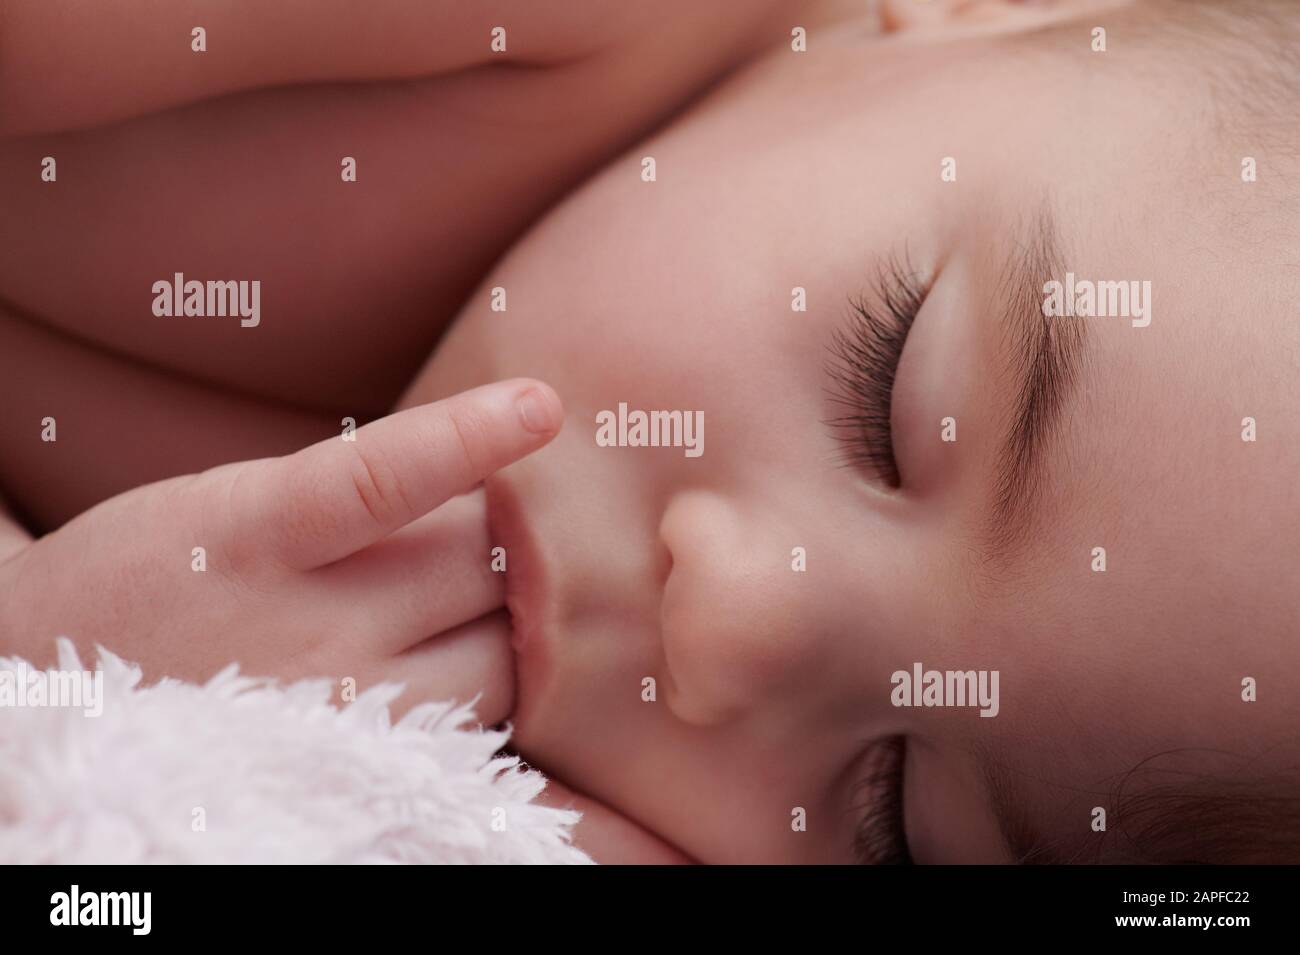 Baby girl sucking finger close up view Stock Photo